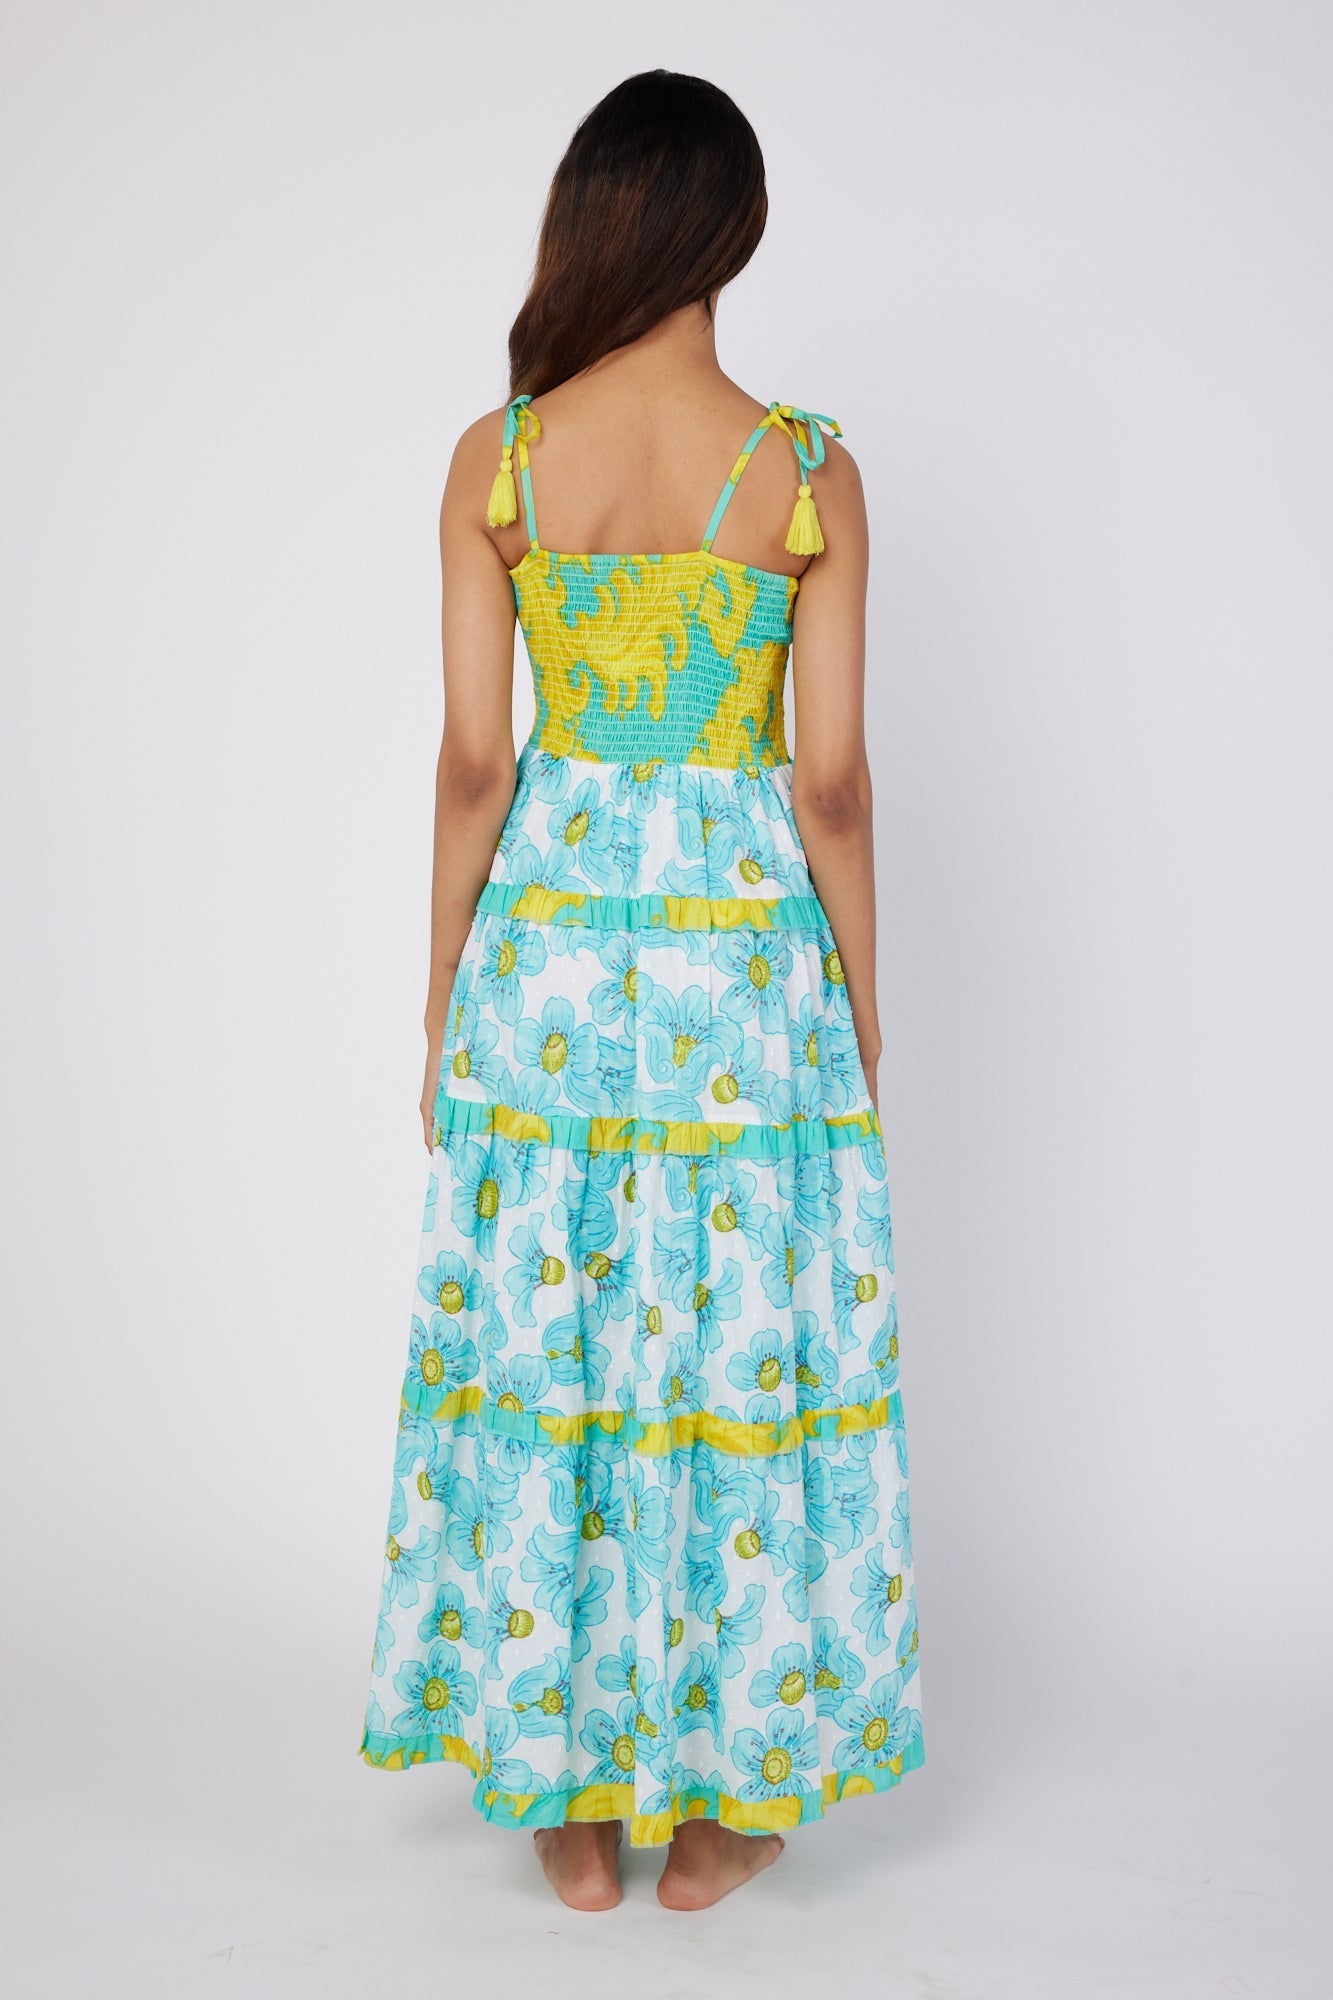 ModaPosa Dianora Spaghetti Strap Smocked Tiered Maxi Dress in Golden Floral Combo . Discover women's resort dresses and lifestyle clothing inspired by the Mediterranean. Free worldwide shipping available!